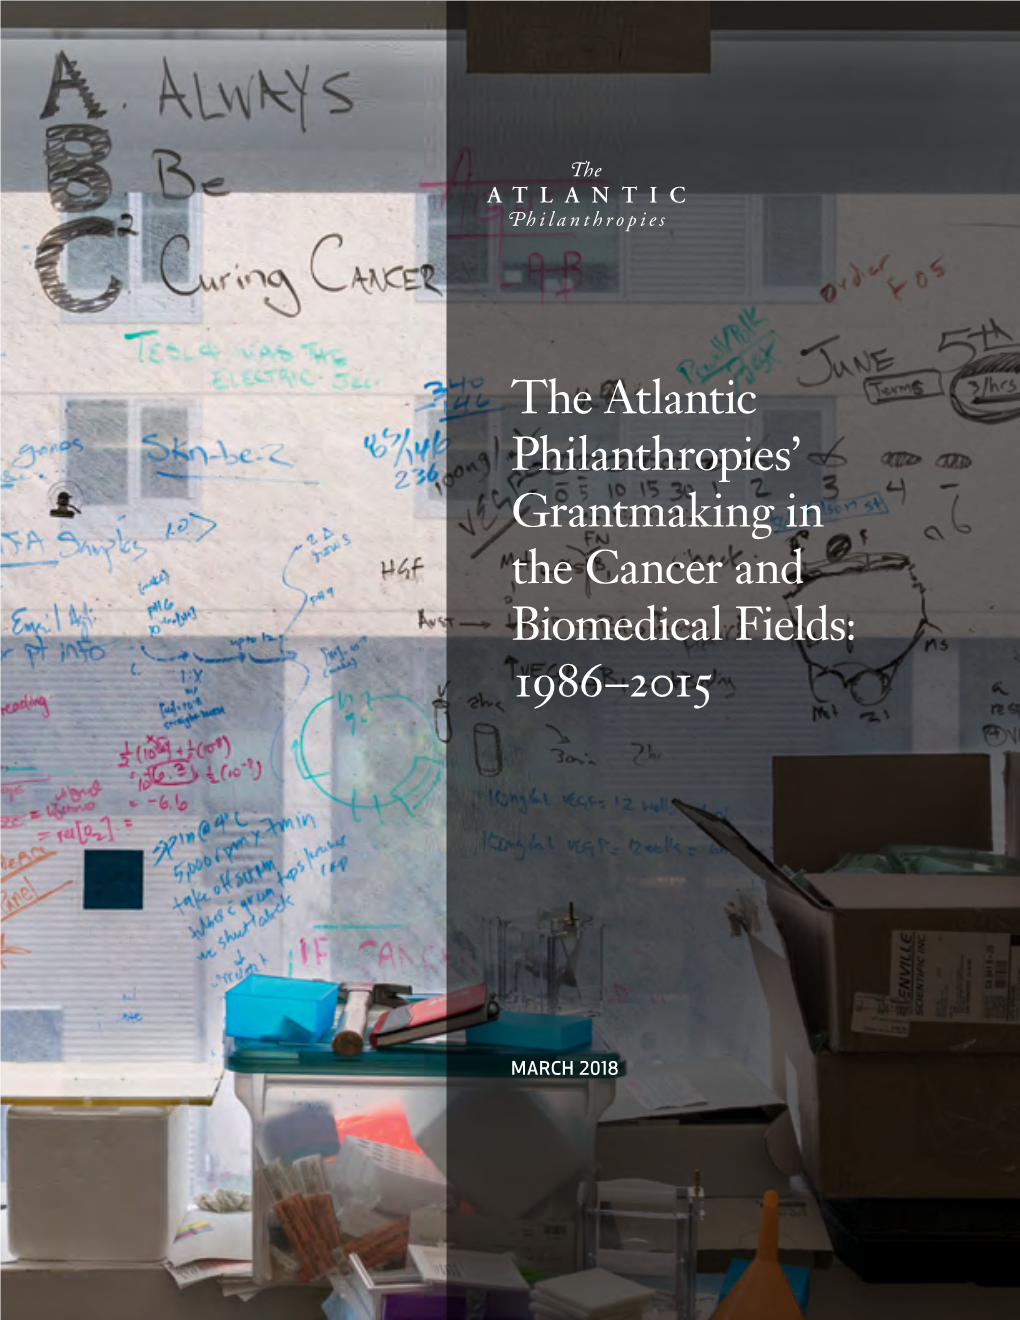 The Atlantic Philanthropies' Grantmaking in the Cancer And